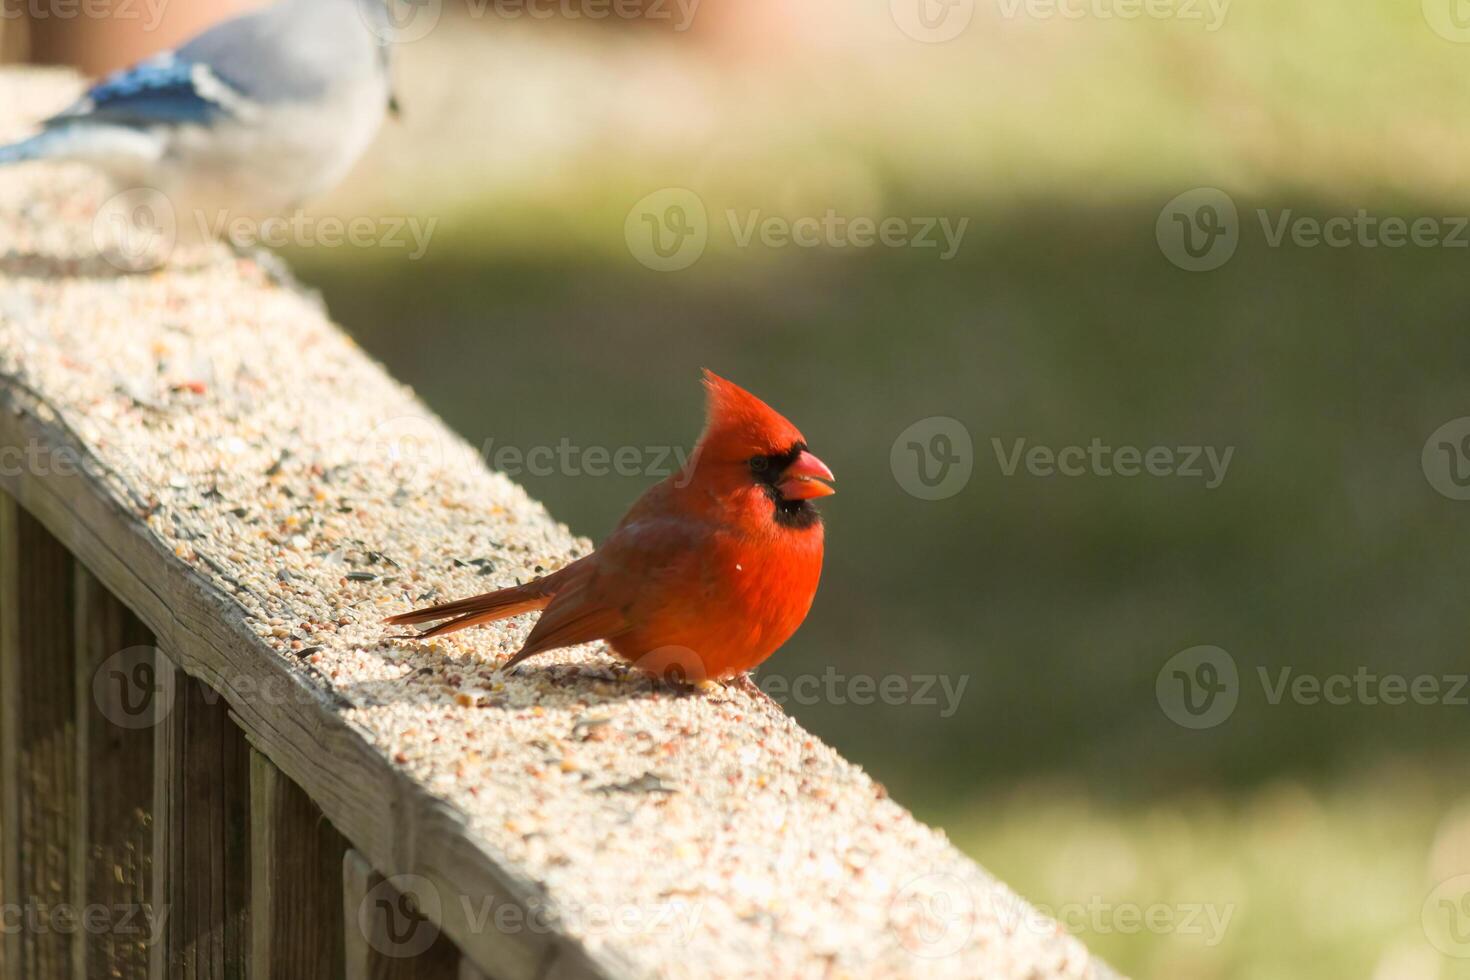 This beautiful cardinal was sitting on the wooden railing of the deck with birdseed. His bright red body stands out from the surroundings. His little black mask protecting his eyes from the light. photo